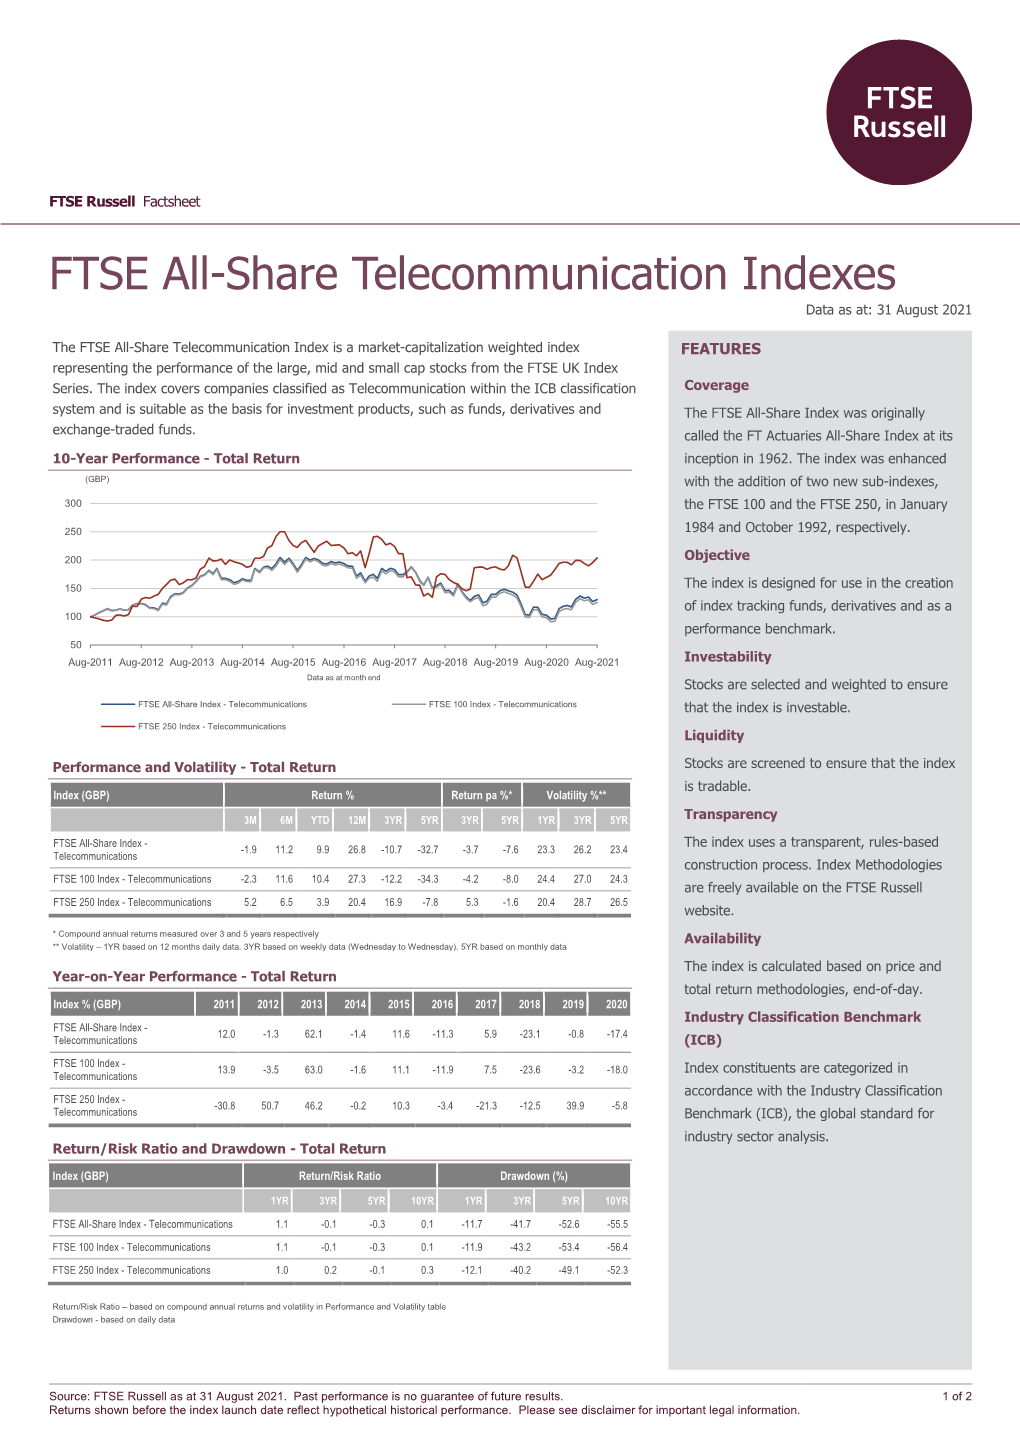 FTSE All-Share Telecommunication Indexes